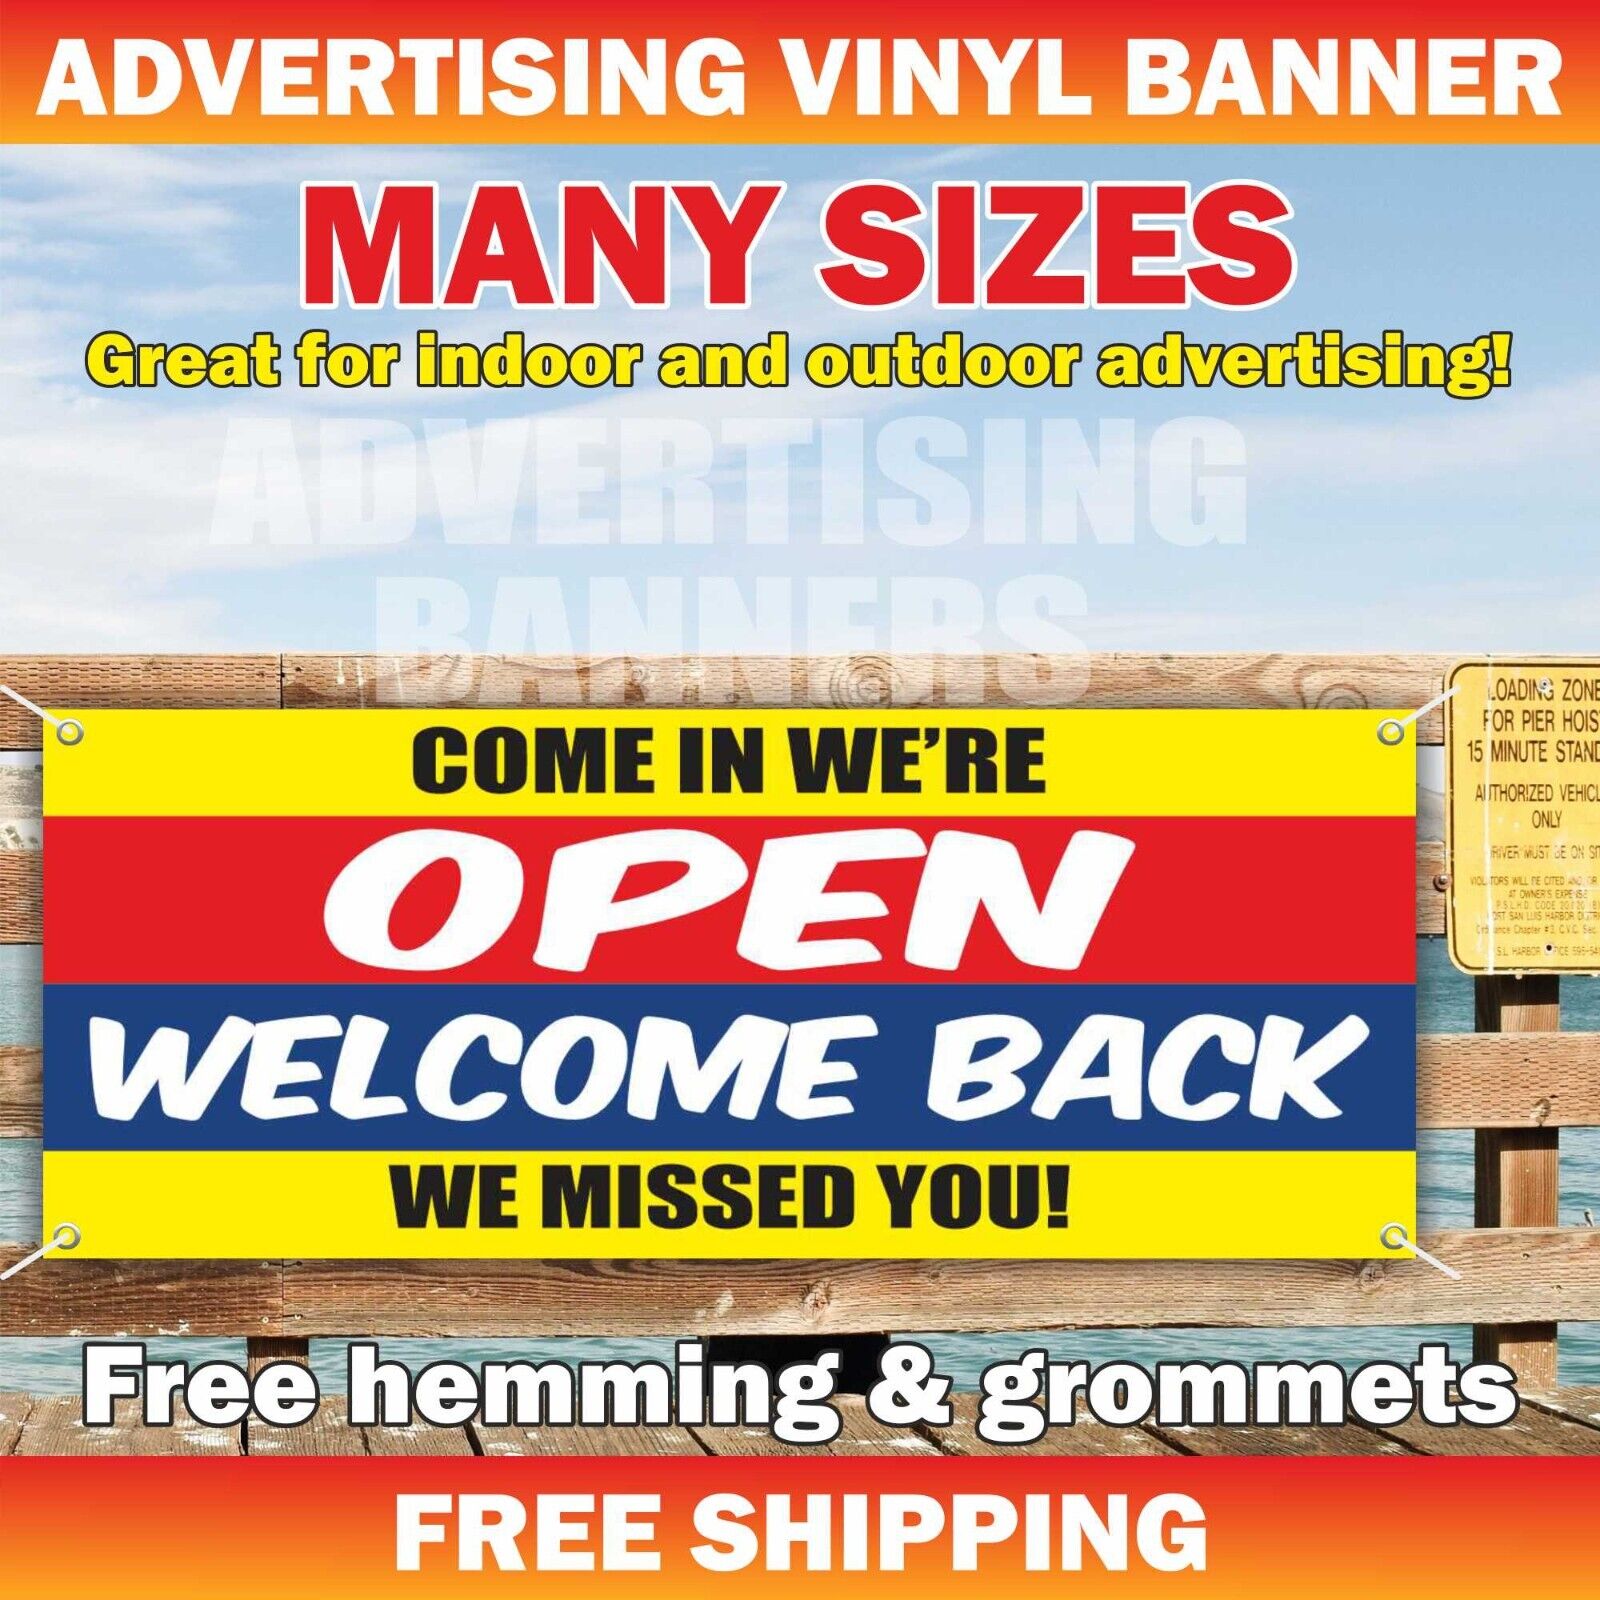 OPEN WELCOME BACK Advertising Banner Vinyl Mesh Sign Grand Opening COME IN WE’RE